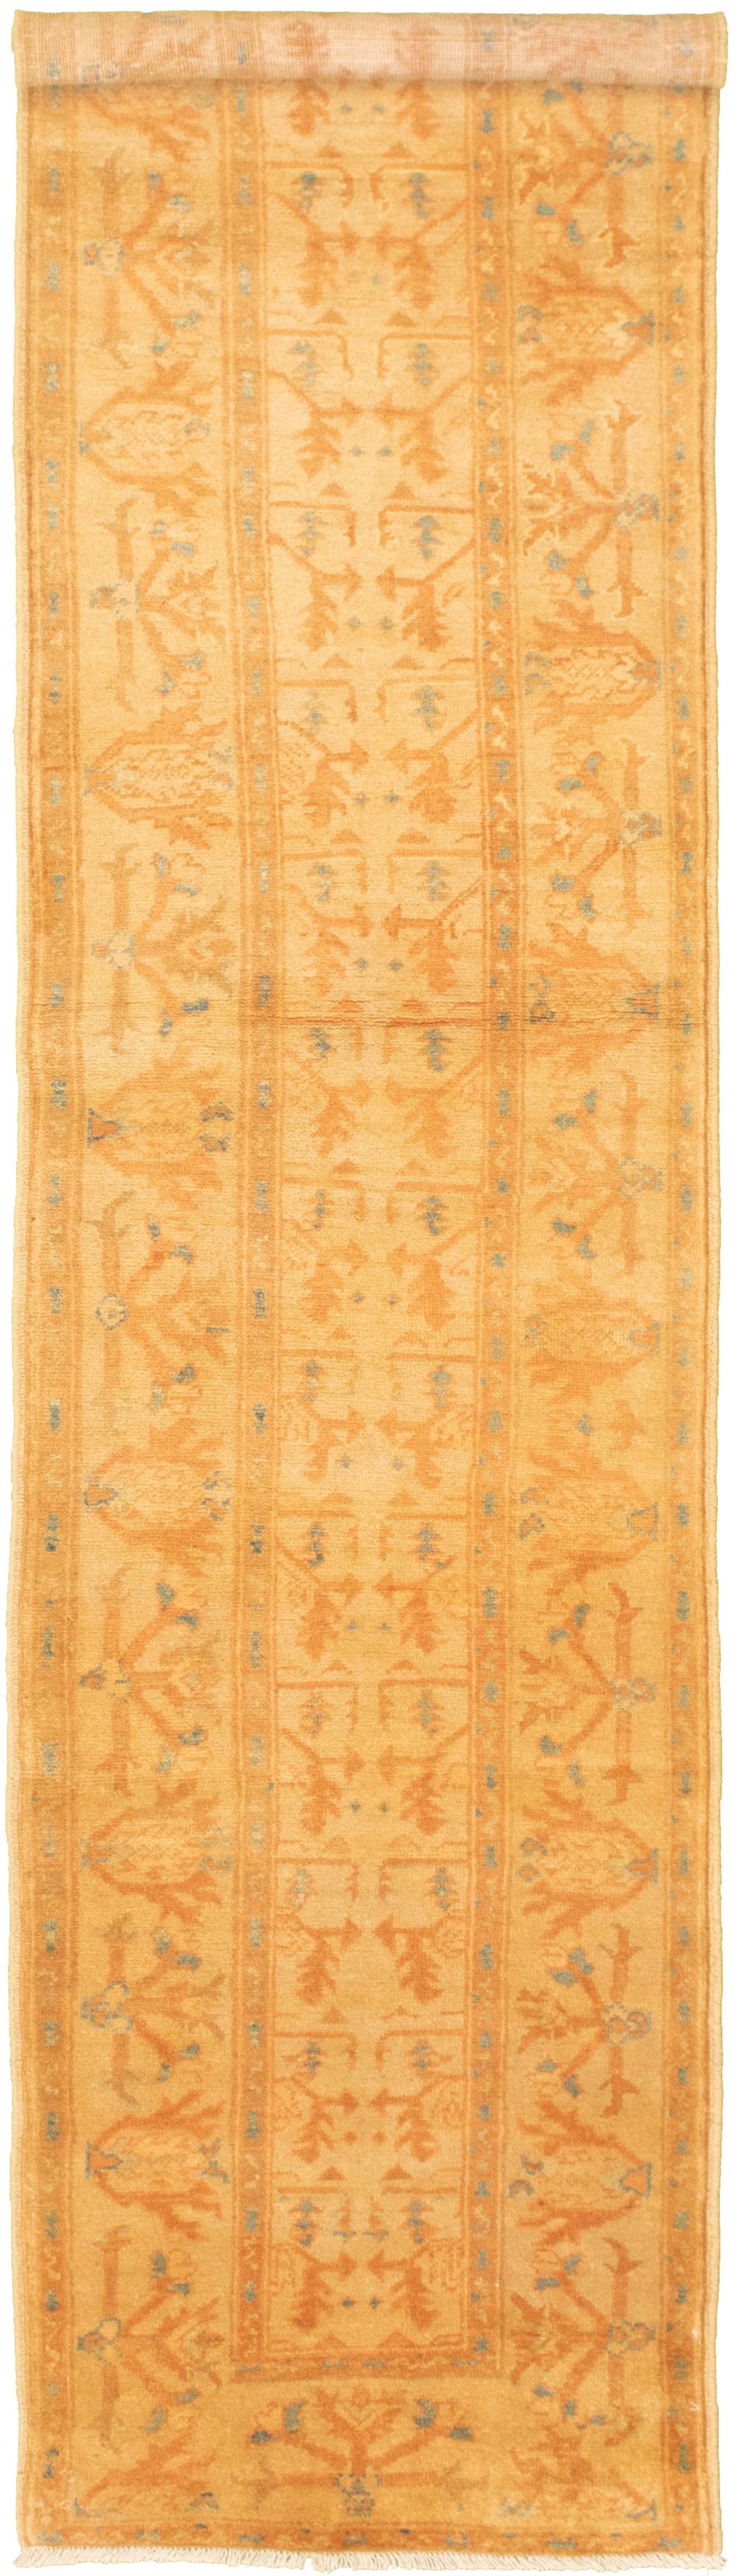 Hand-knotted Chobi Twisted Light Brown Wool Rug 2'2" x 10'8" Size: 2'2" x 10'8"  